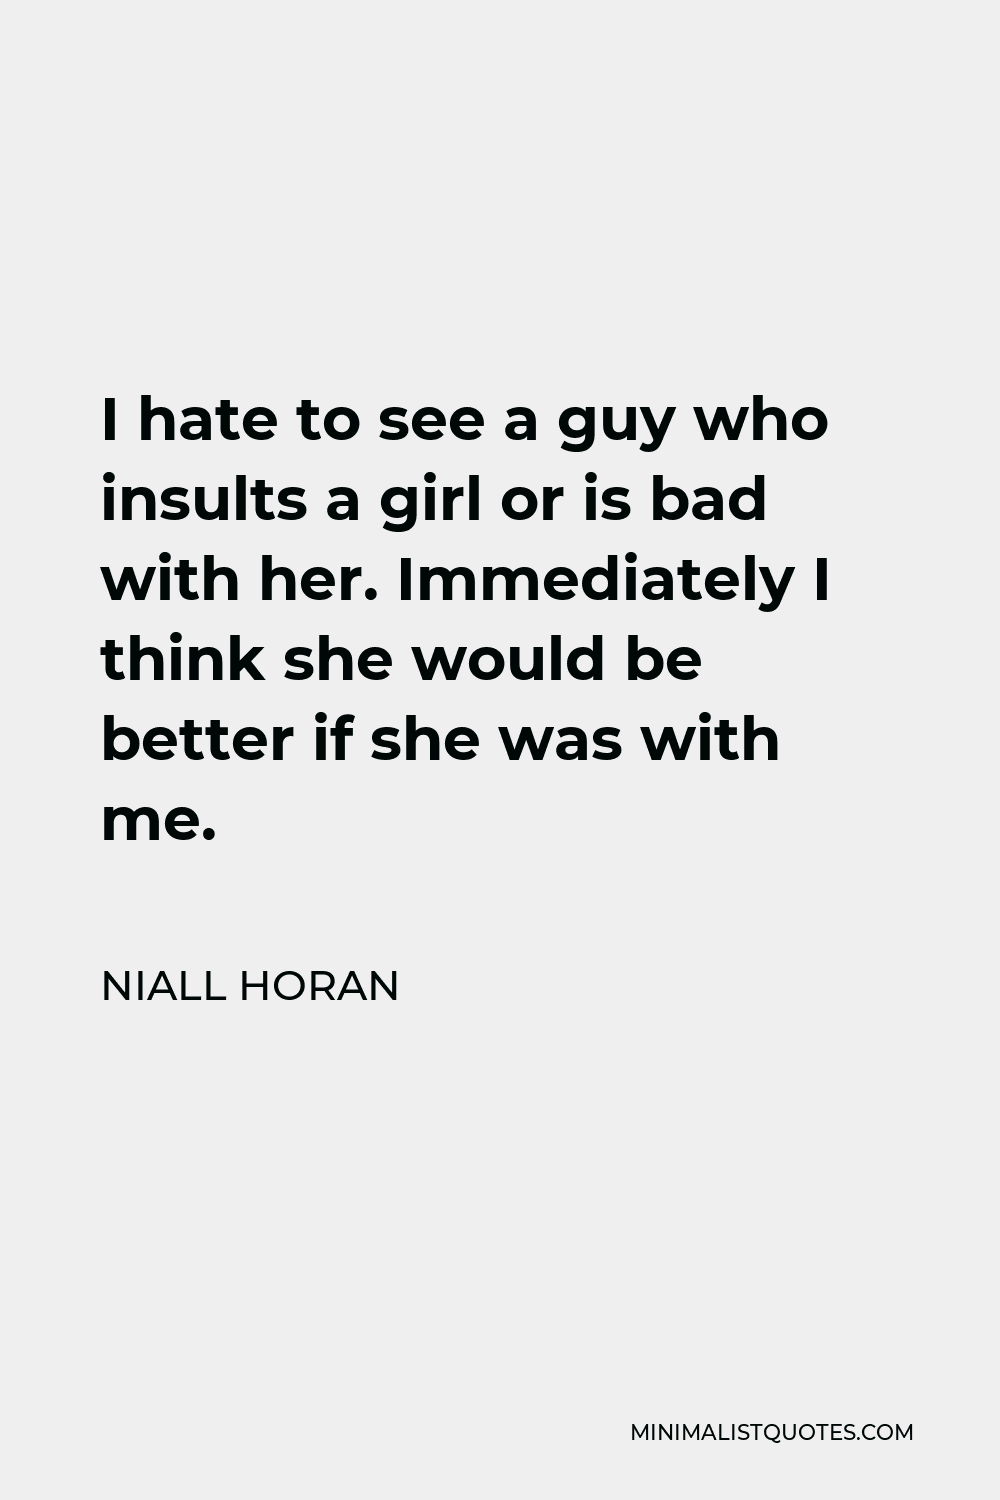 Niall Horan Quote - I hate to see a guy who insults a girl or is bad with her. Immediately I think she would be better if she was with me.